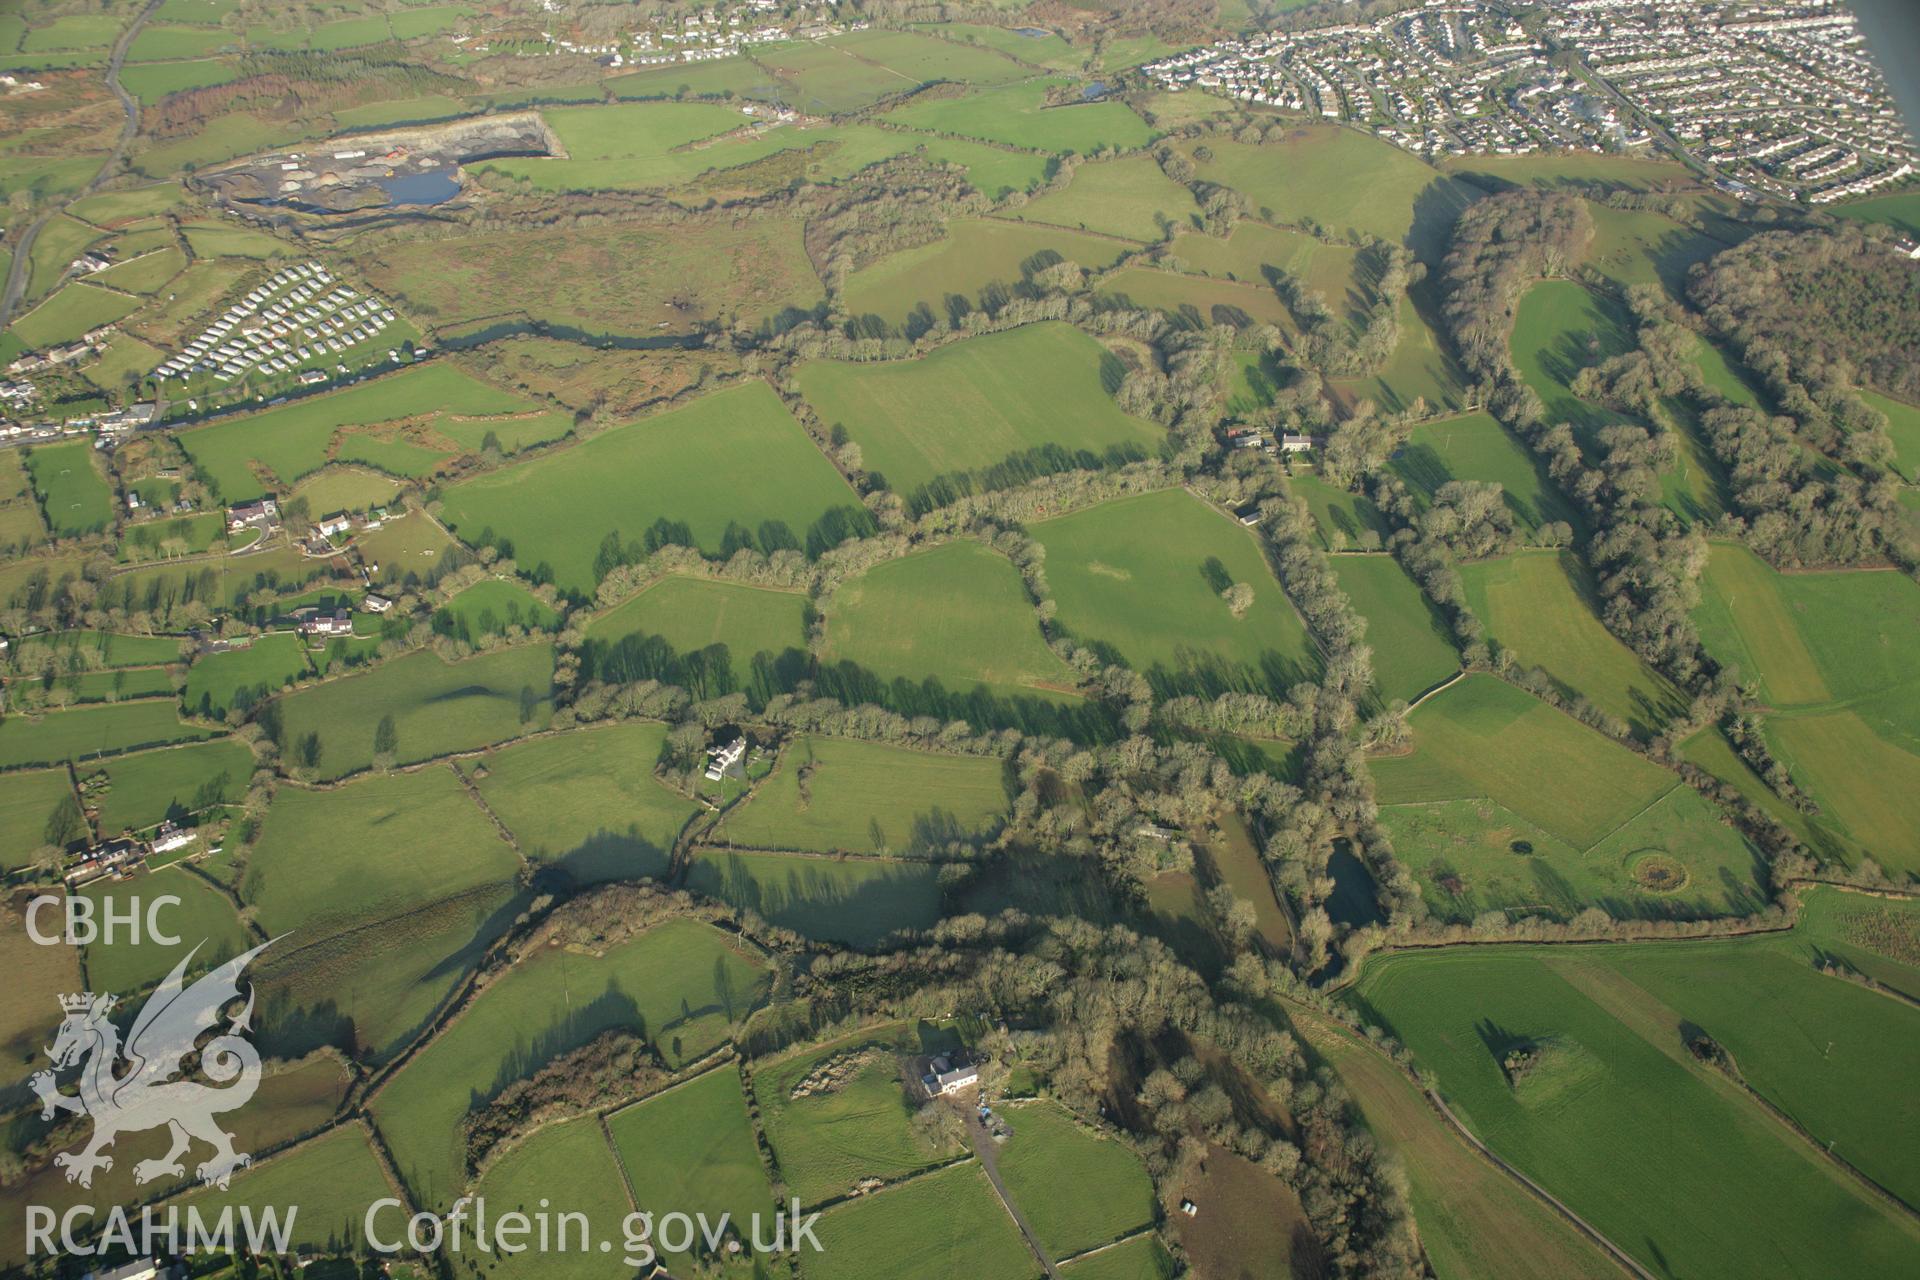 RCAHMW colour oblique aerial photograph of the Viking settlement at Glyn, Llanbedrgoch, and the surrounding landscape. Taken on 25 January 2007 by Toby Driver